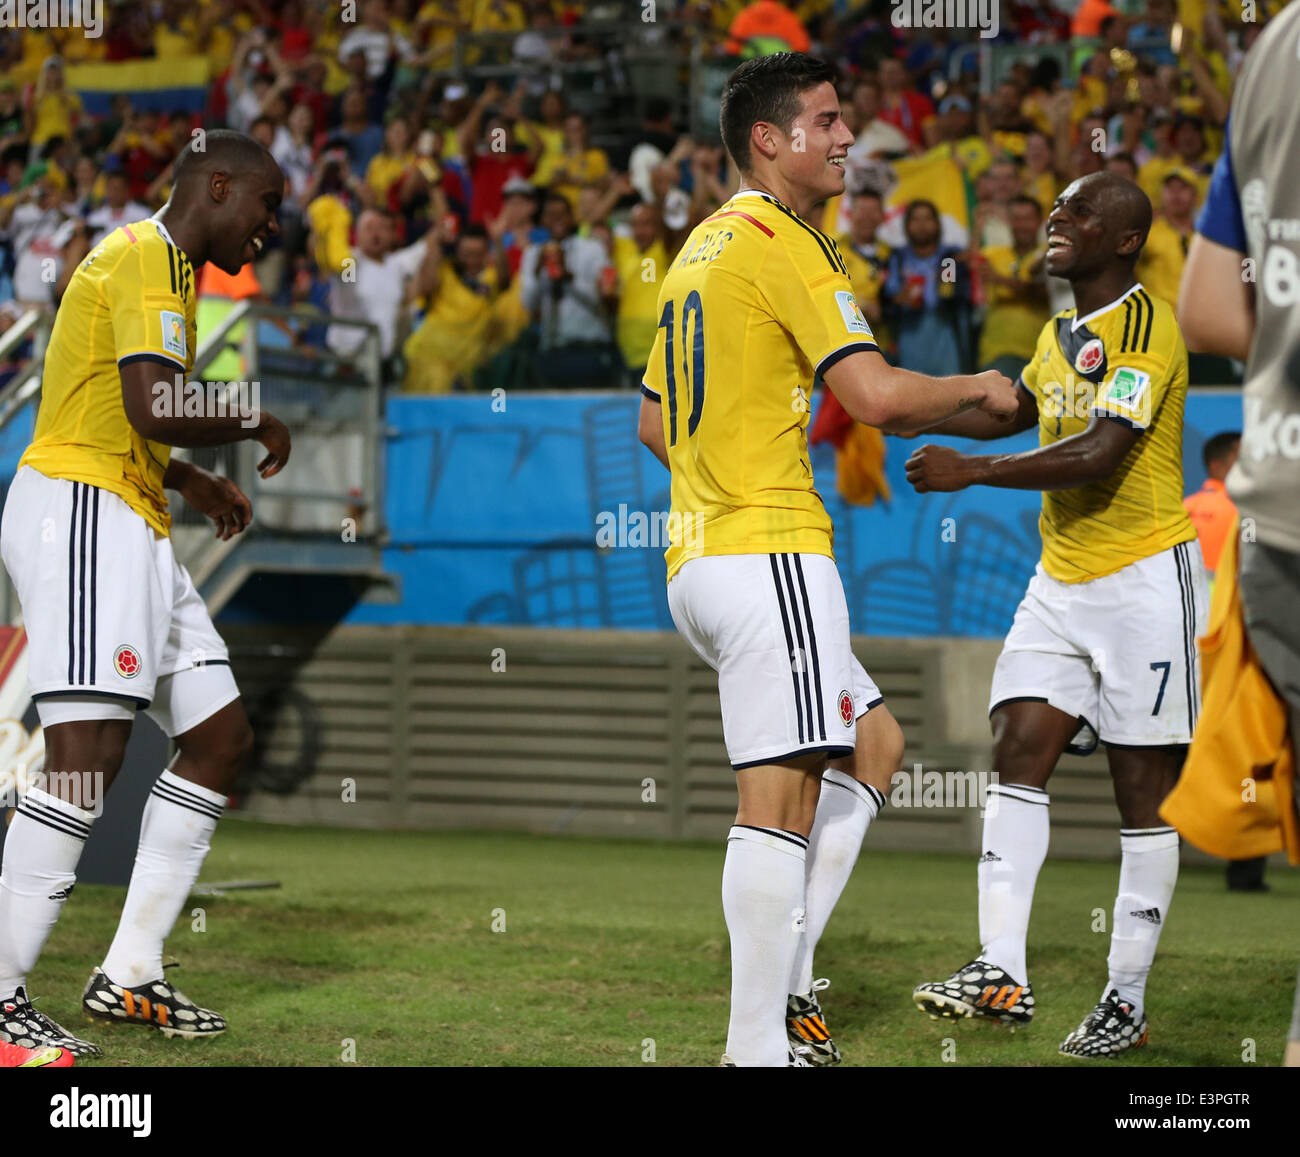 (140624) -- CUIABA, June 24, 2014 (Xinhua) -- Colombia's James Rodriguez (C) celebrates the goal during a Group C match between Japan and Colombia of 2014 FIFA World Cup at the Arena Pantanal Stadium in Cuiaba, Brazil, June 24, 2014. (Xinhua/Li Ming) Stock Photo